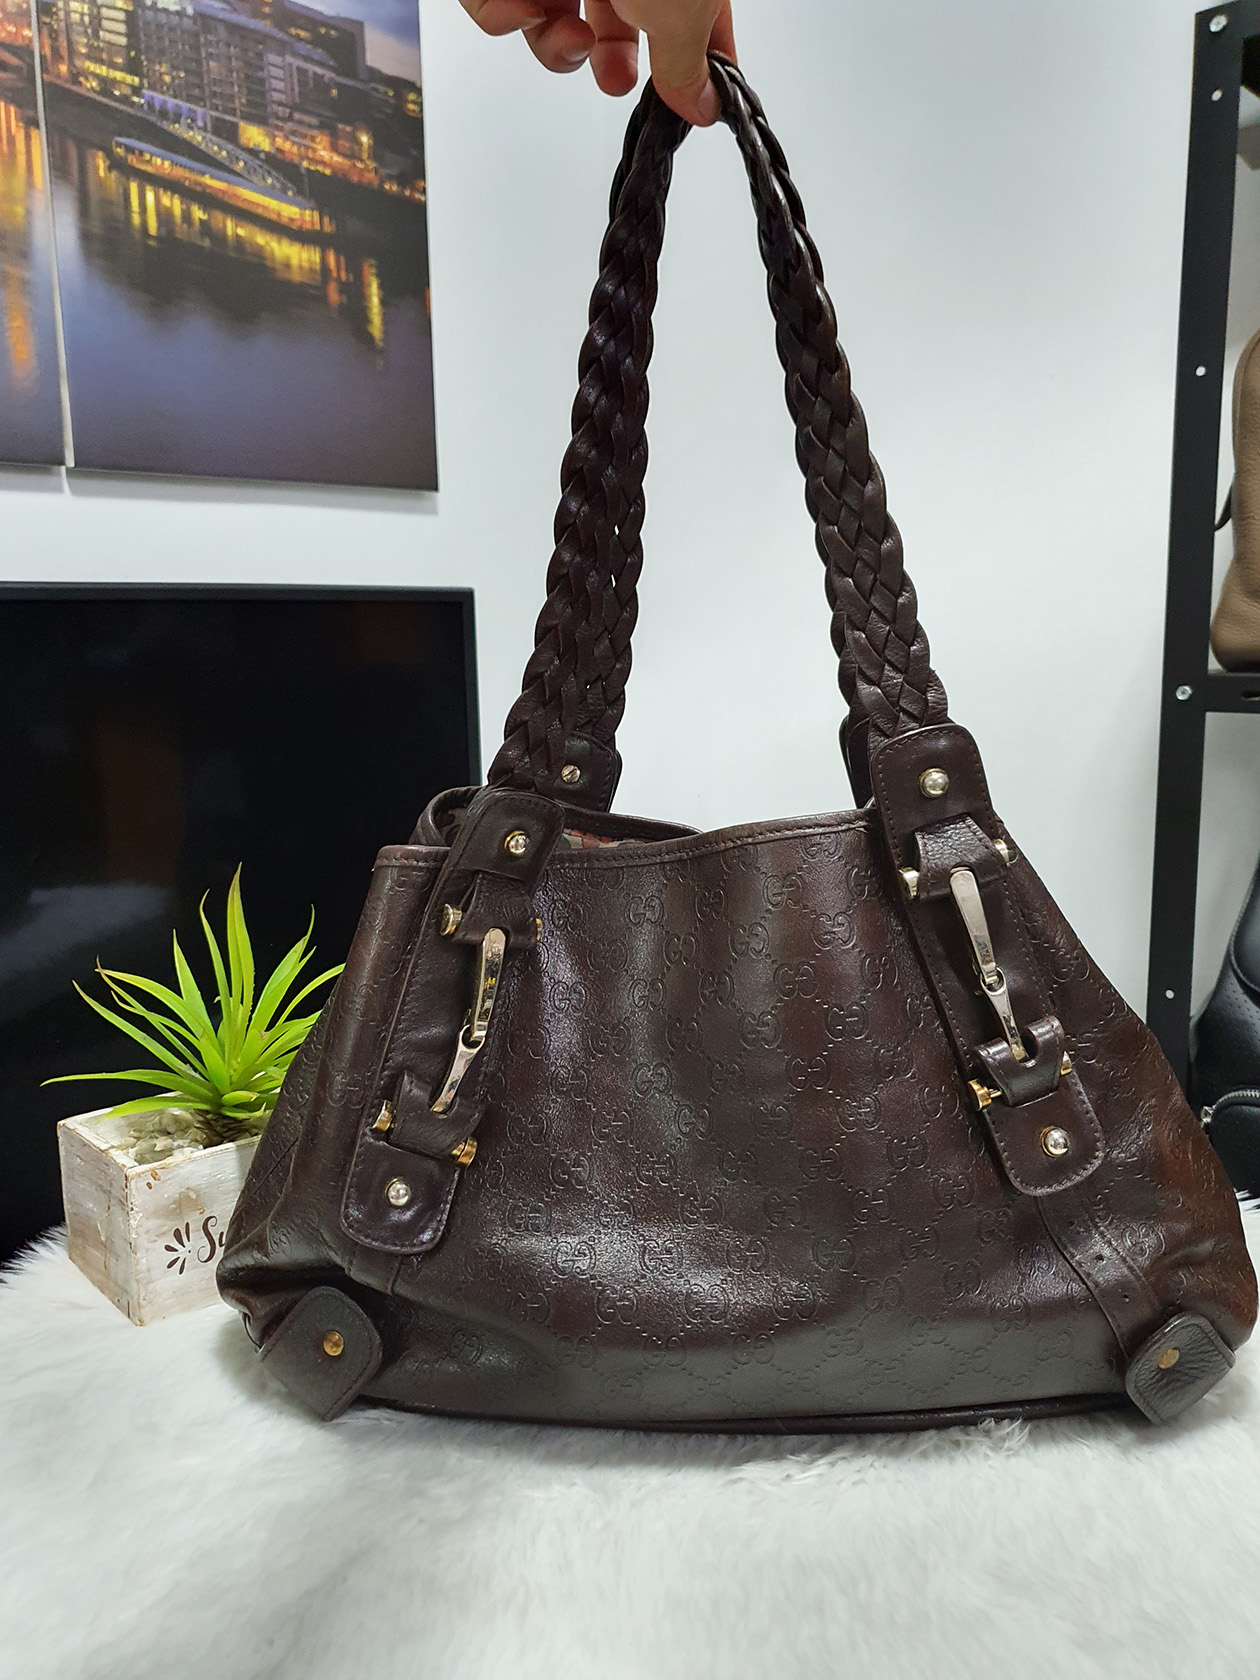 Gucci Brown Leather Shoulder Bag | Mommy Micah - Luxury Bags Trusted ...